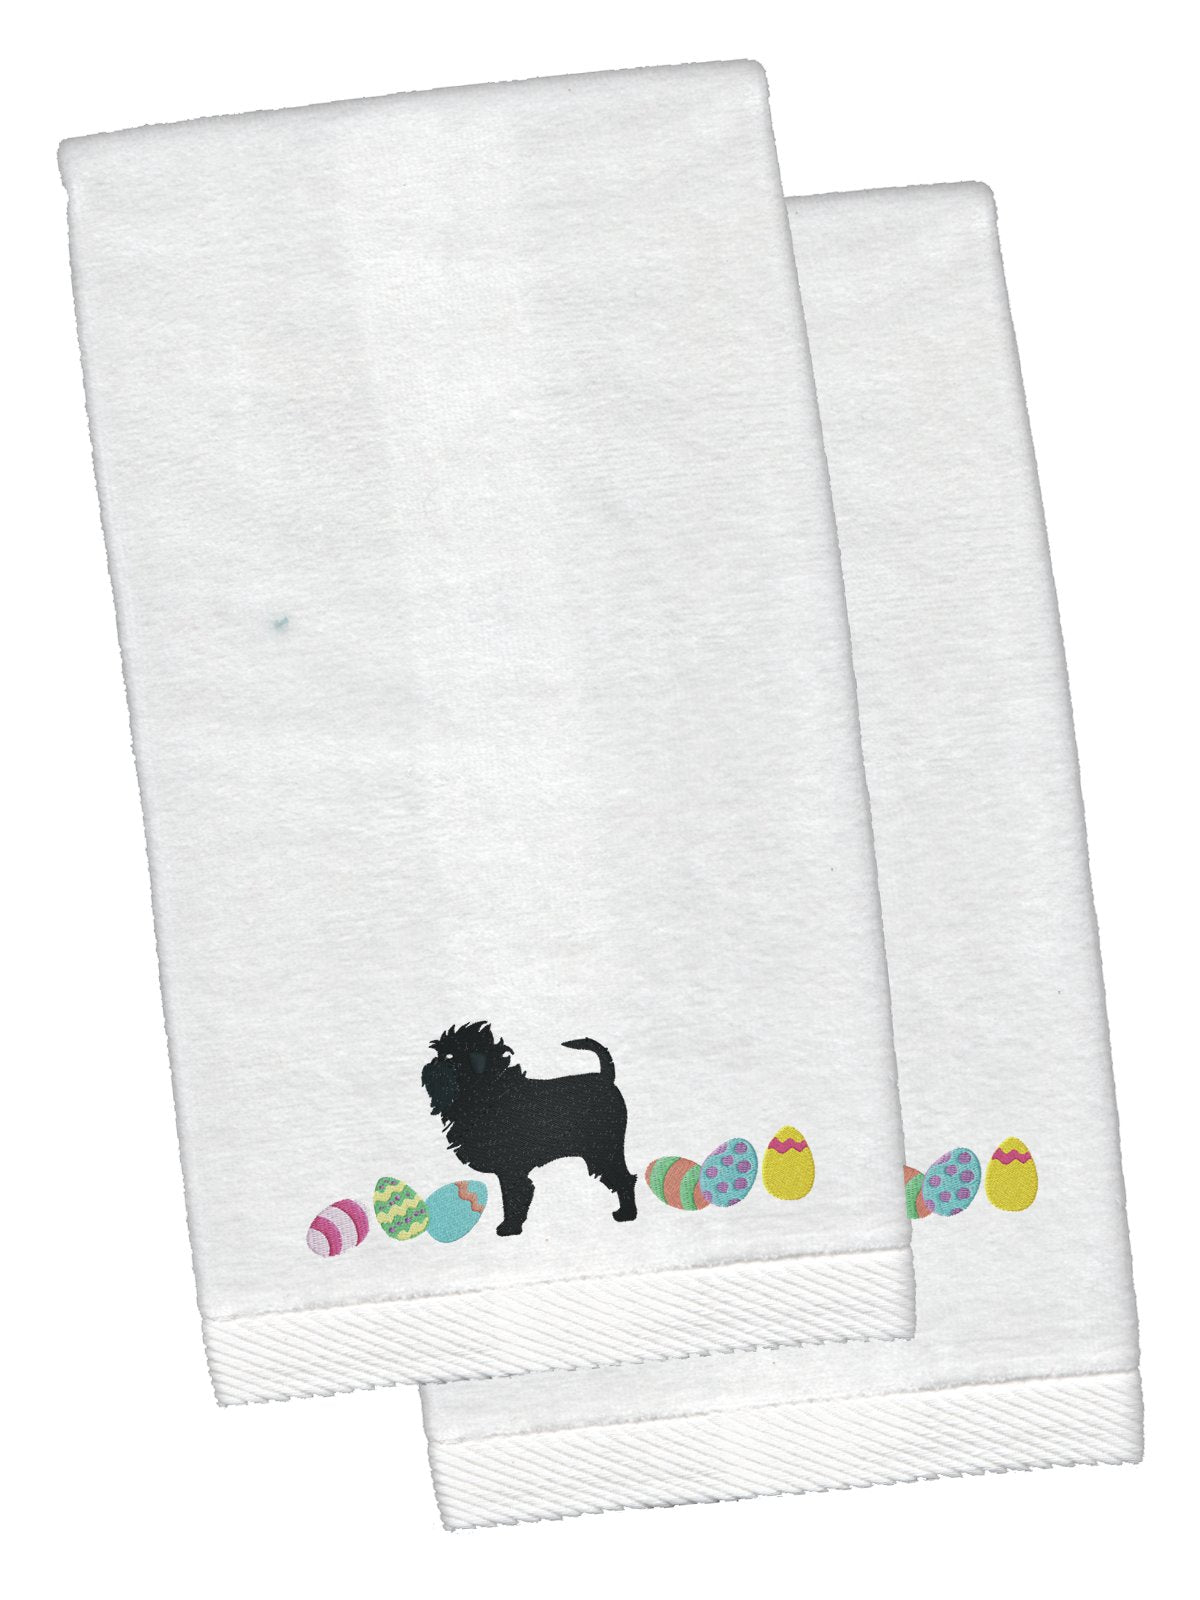 Affenpinscher Easter White Embroidered Plush Hand Towel Set of 2 CK1591KTEMB by Caroline's Treasures